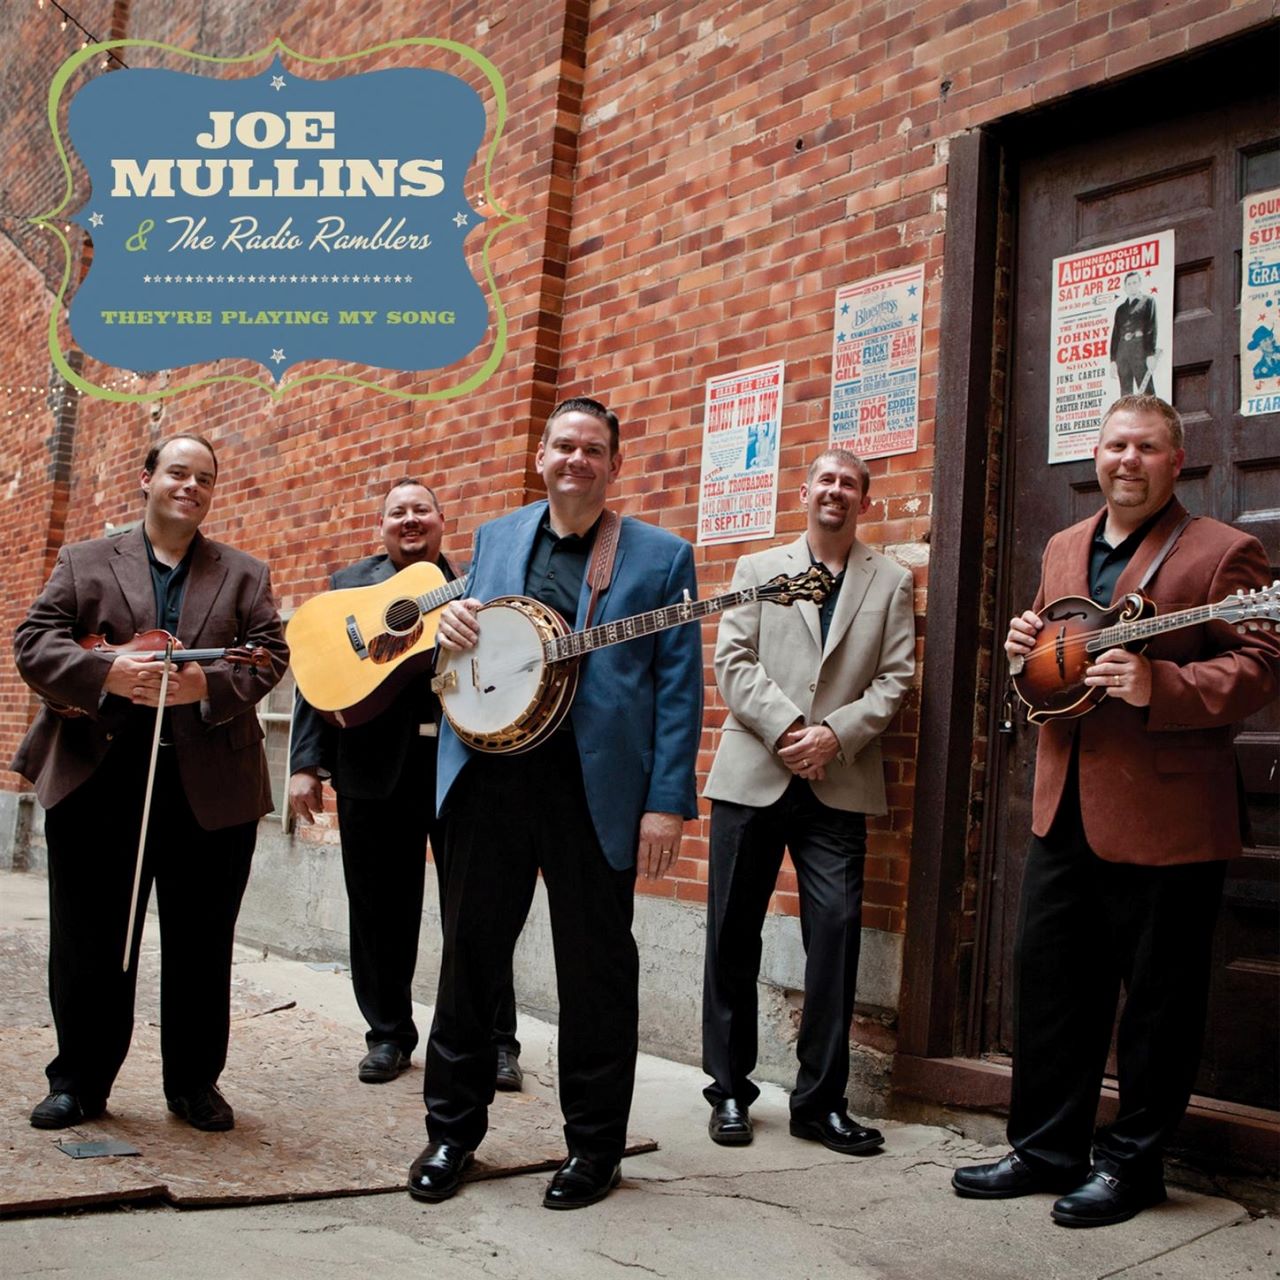 Joe Mullins & The Radio Ramblers - They’re Playing My Song cover albumj